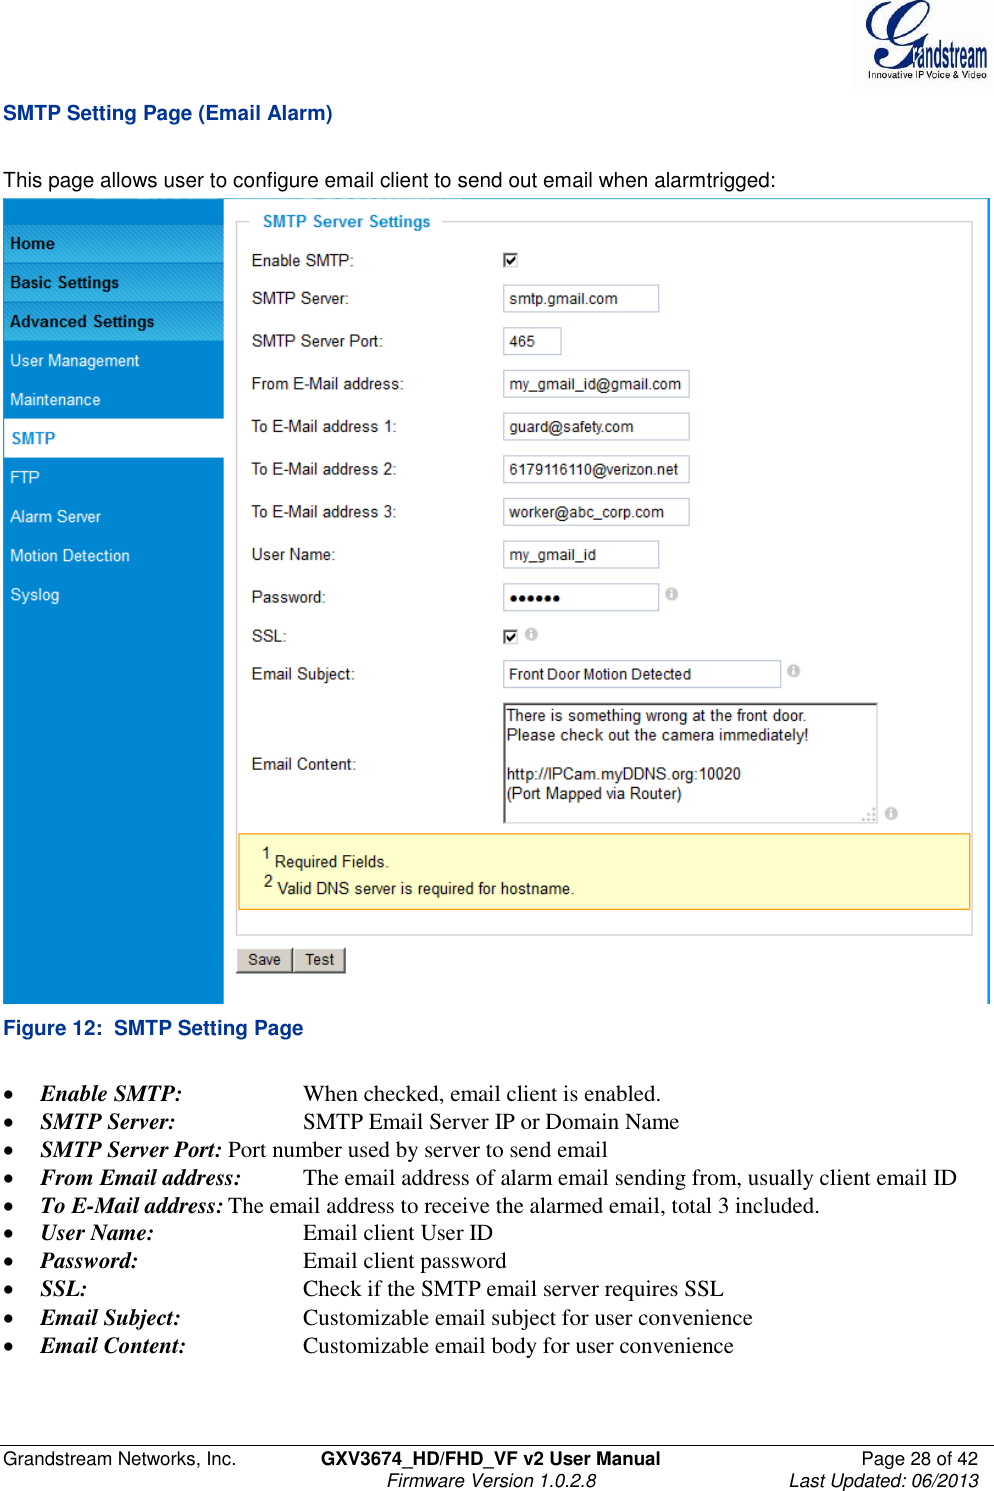  Grandstream Networks, Inc.  GXV3674_HD/FHD_VF v2 User Manual  Page 28 of 42   Firmware Version 1.0.2.8  Last Updated: 06/2013  SMTP Setting Page (Email Alarm)  This page allows user to configure email client to send out email when alarmtrigged:  Figure 12:  SMTP Setting Page   Enable SMTP:     When checked, email client is enabled.  SMTP Server:    SMTP Email Server IP or Domain Name  SMTP Server Port: Port number used by server to send email  From Email address:  The email address of alarm email sending from, usually client email ID  To E-Mail address: The email address to receive the alarmed email, total 3 included.   User Name:    Email client User ID  Password:      Email client password  SSL:      Check if the SMTP email server requires SSL  Email Subject:    Customizable email subject for user convenience  Email Content:    Customizable email body for user convenience   